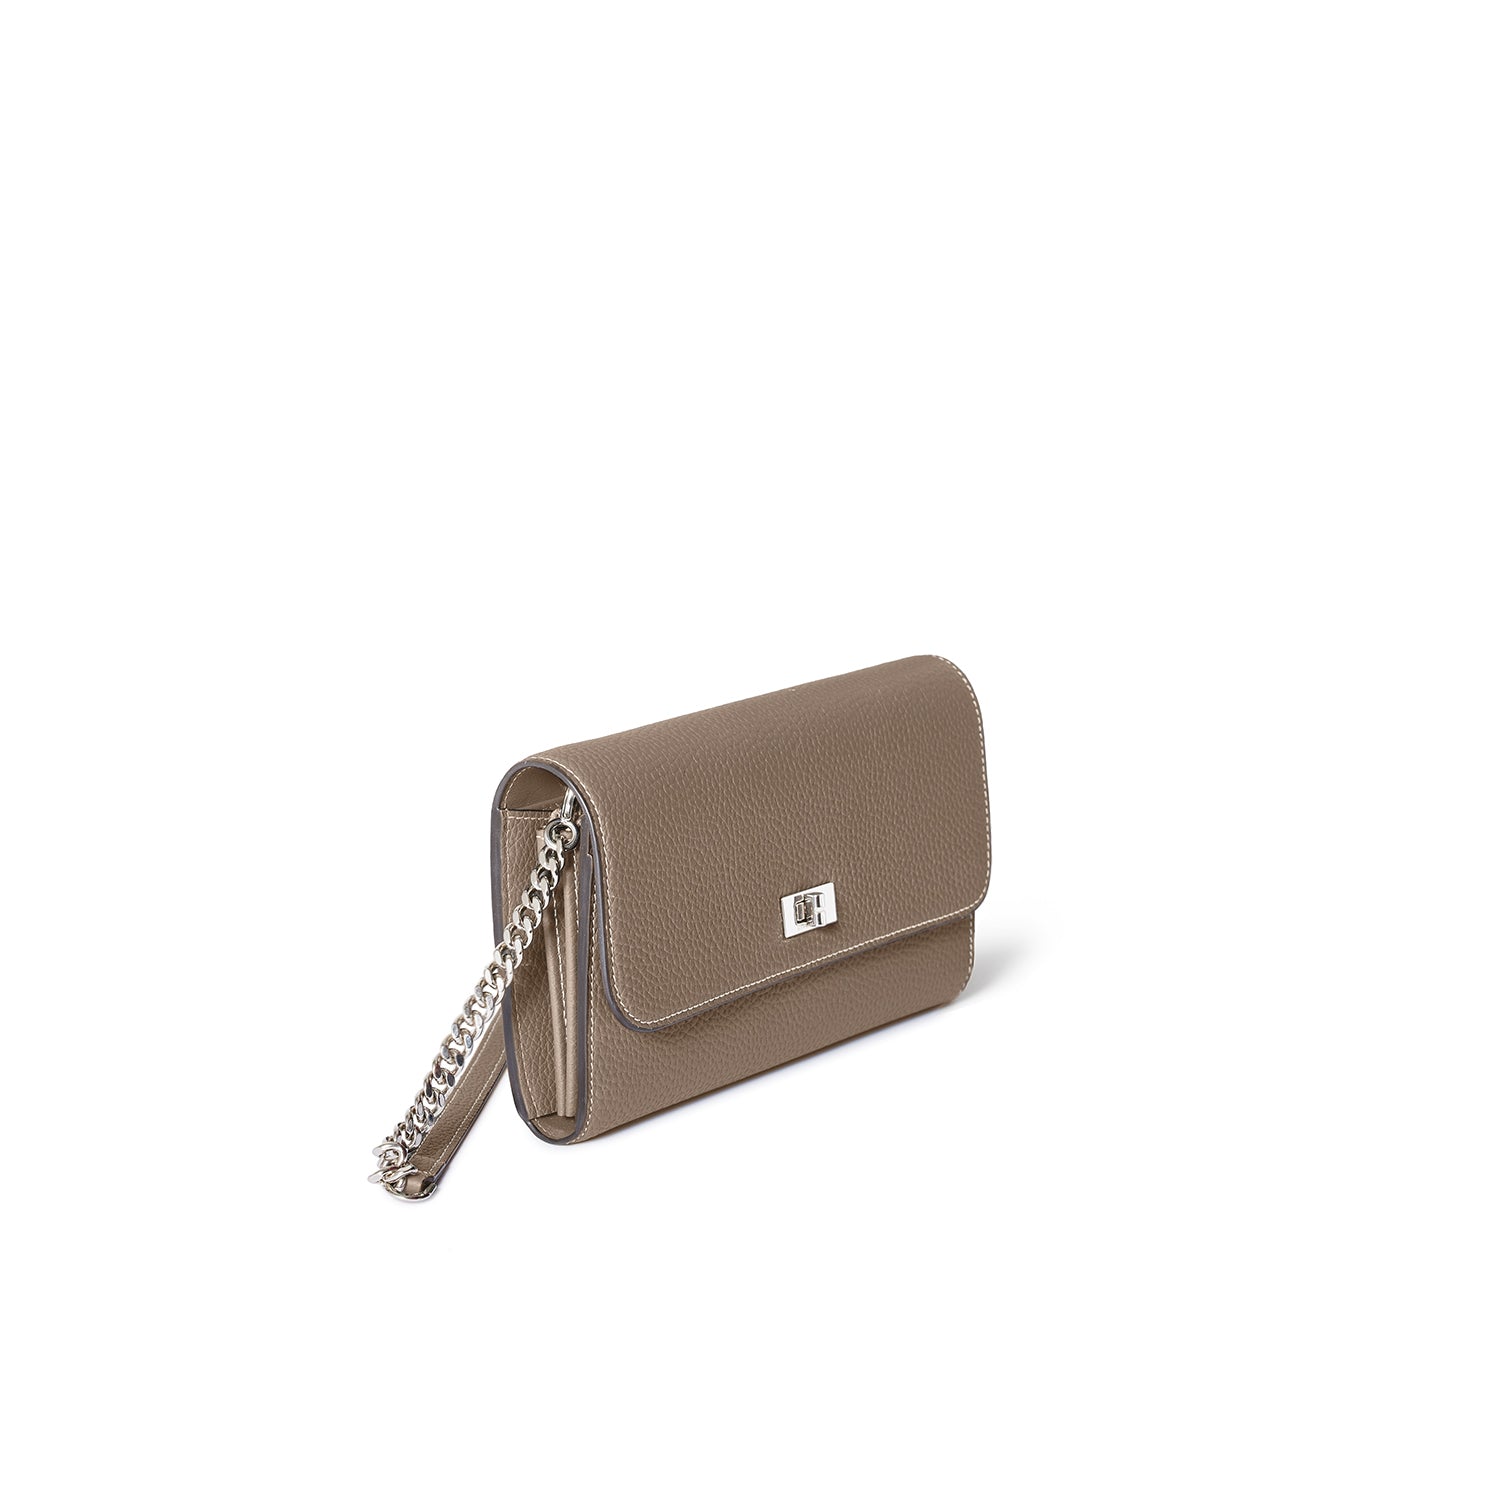 Beatrice Long Wallet in Shrink Leather